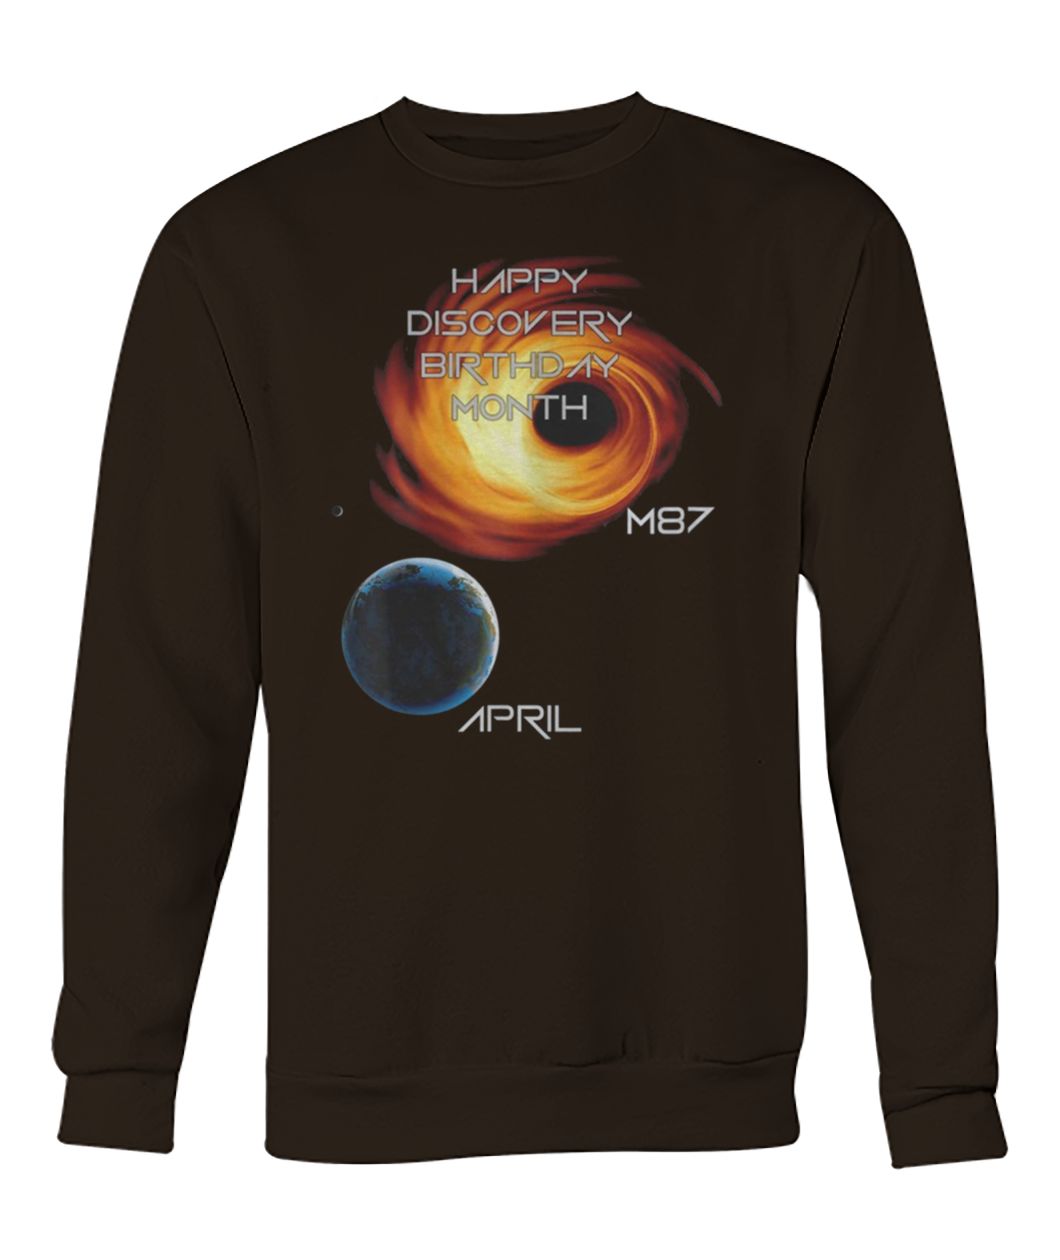 Happy discovery birthday month first picture of a black hole m87 galaxy april 10 crew neck sweatshirt